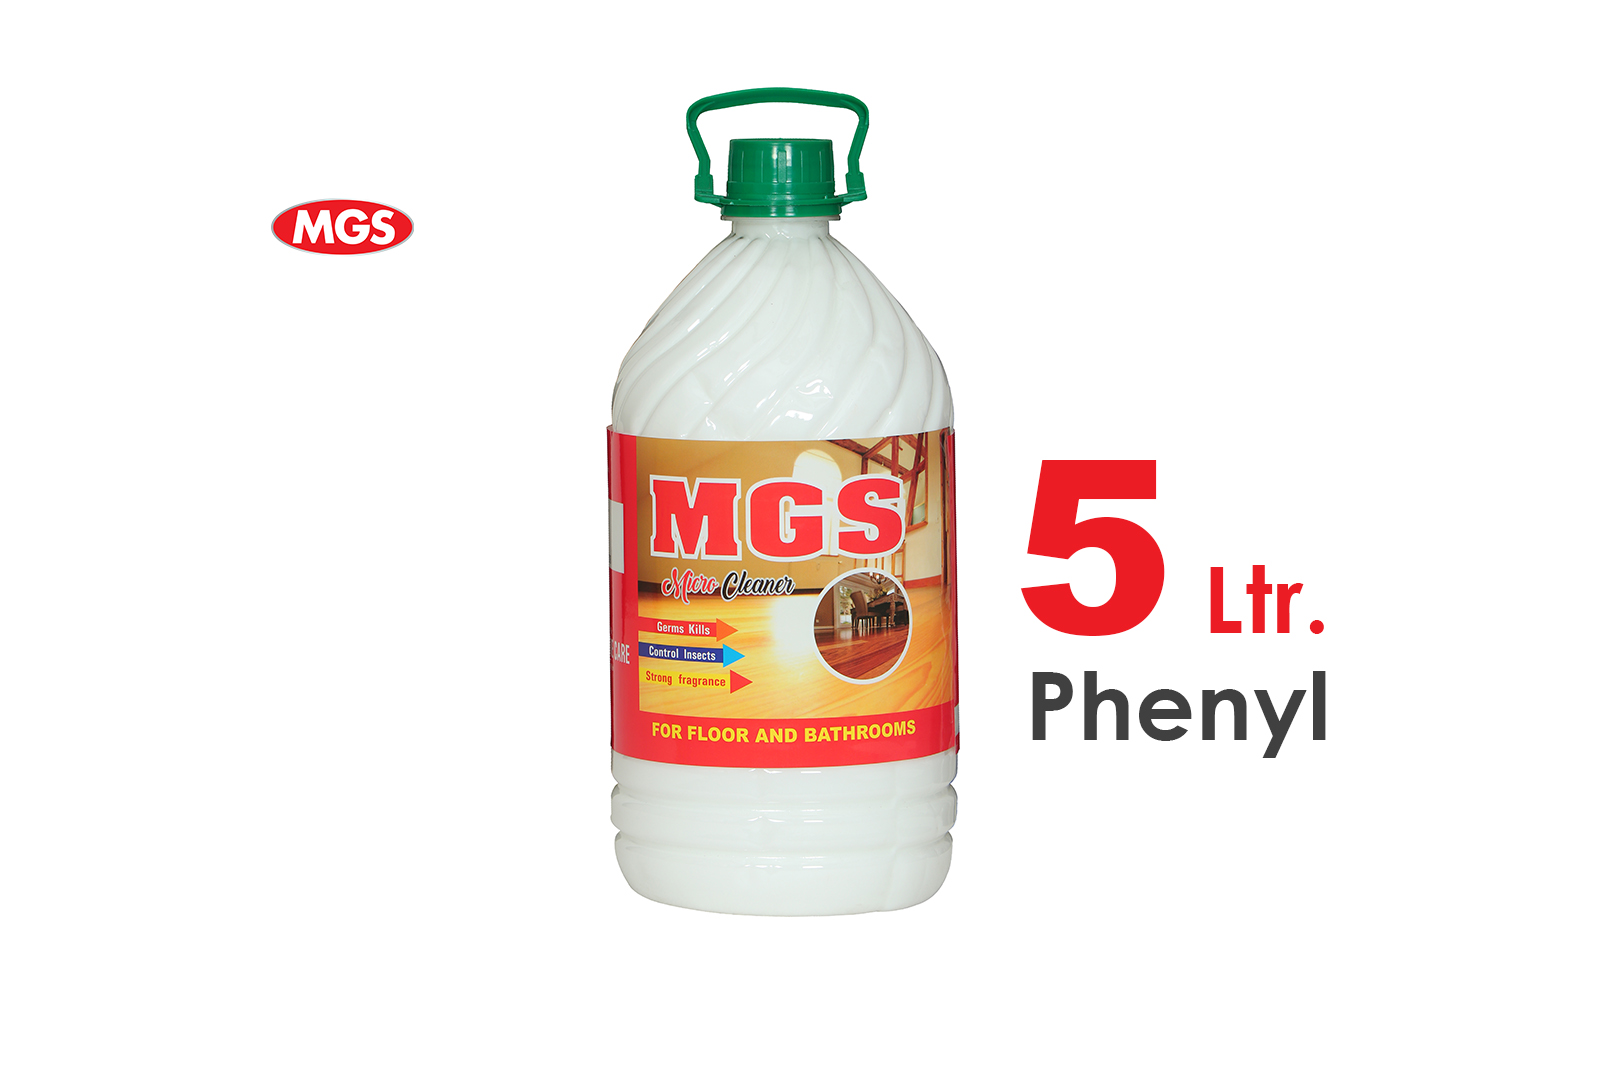 MGS Phenyl 5 Ltr. Micro Cleaner For Floors and Bathrooms